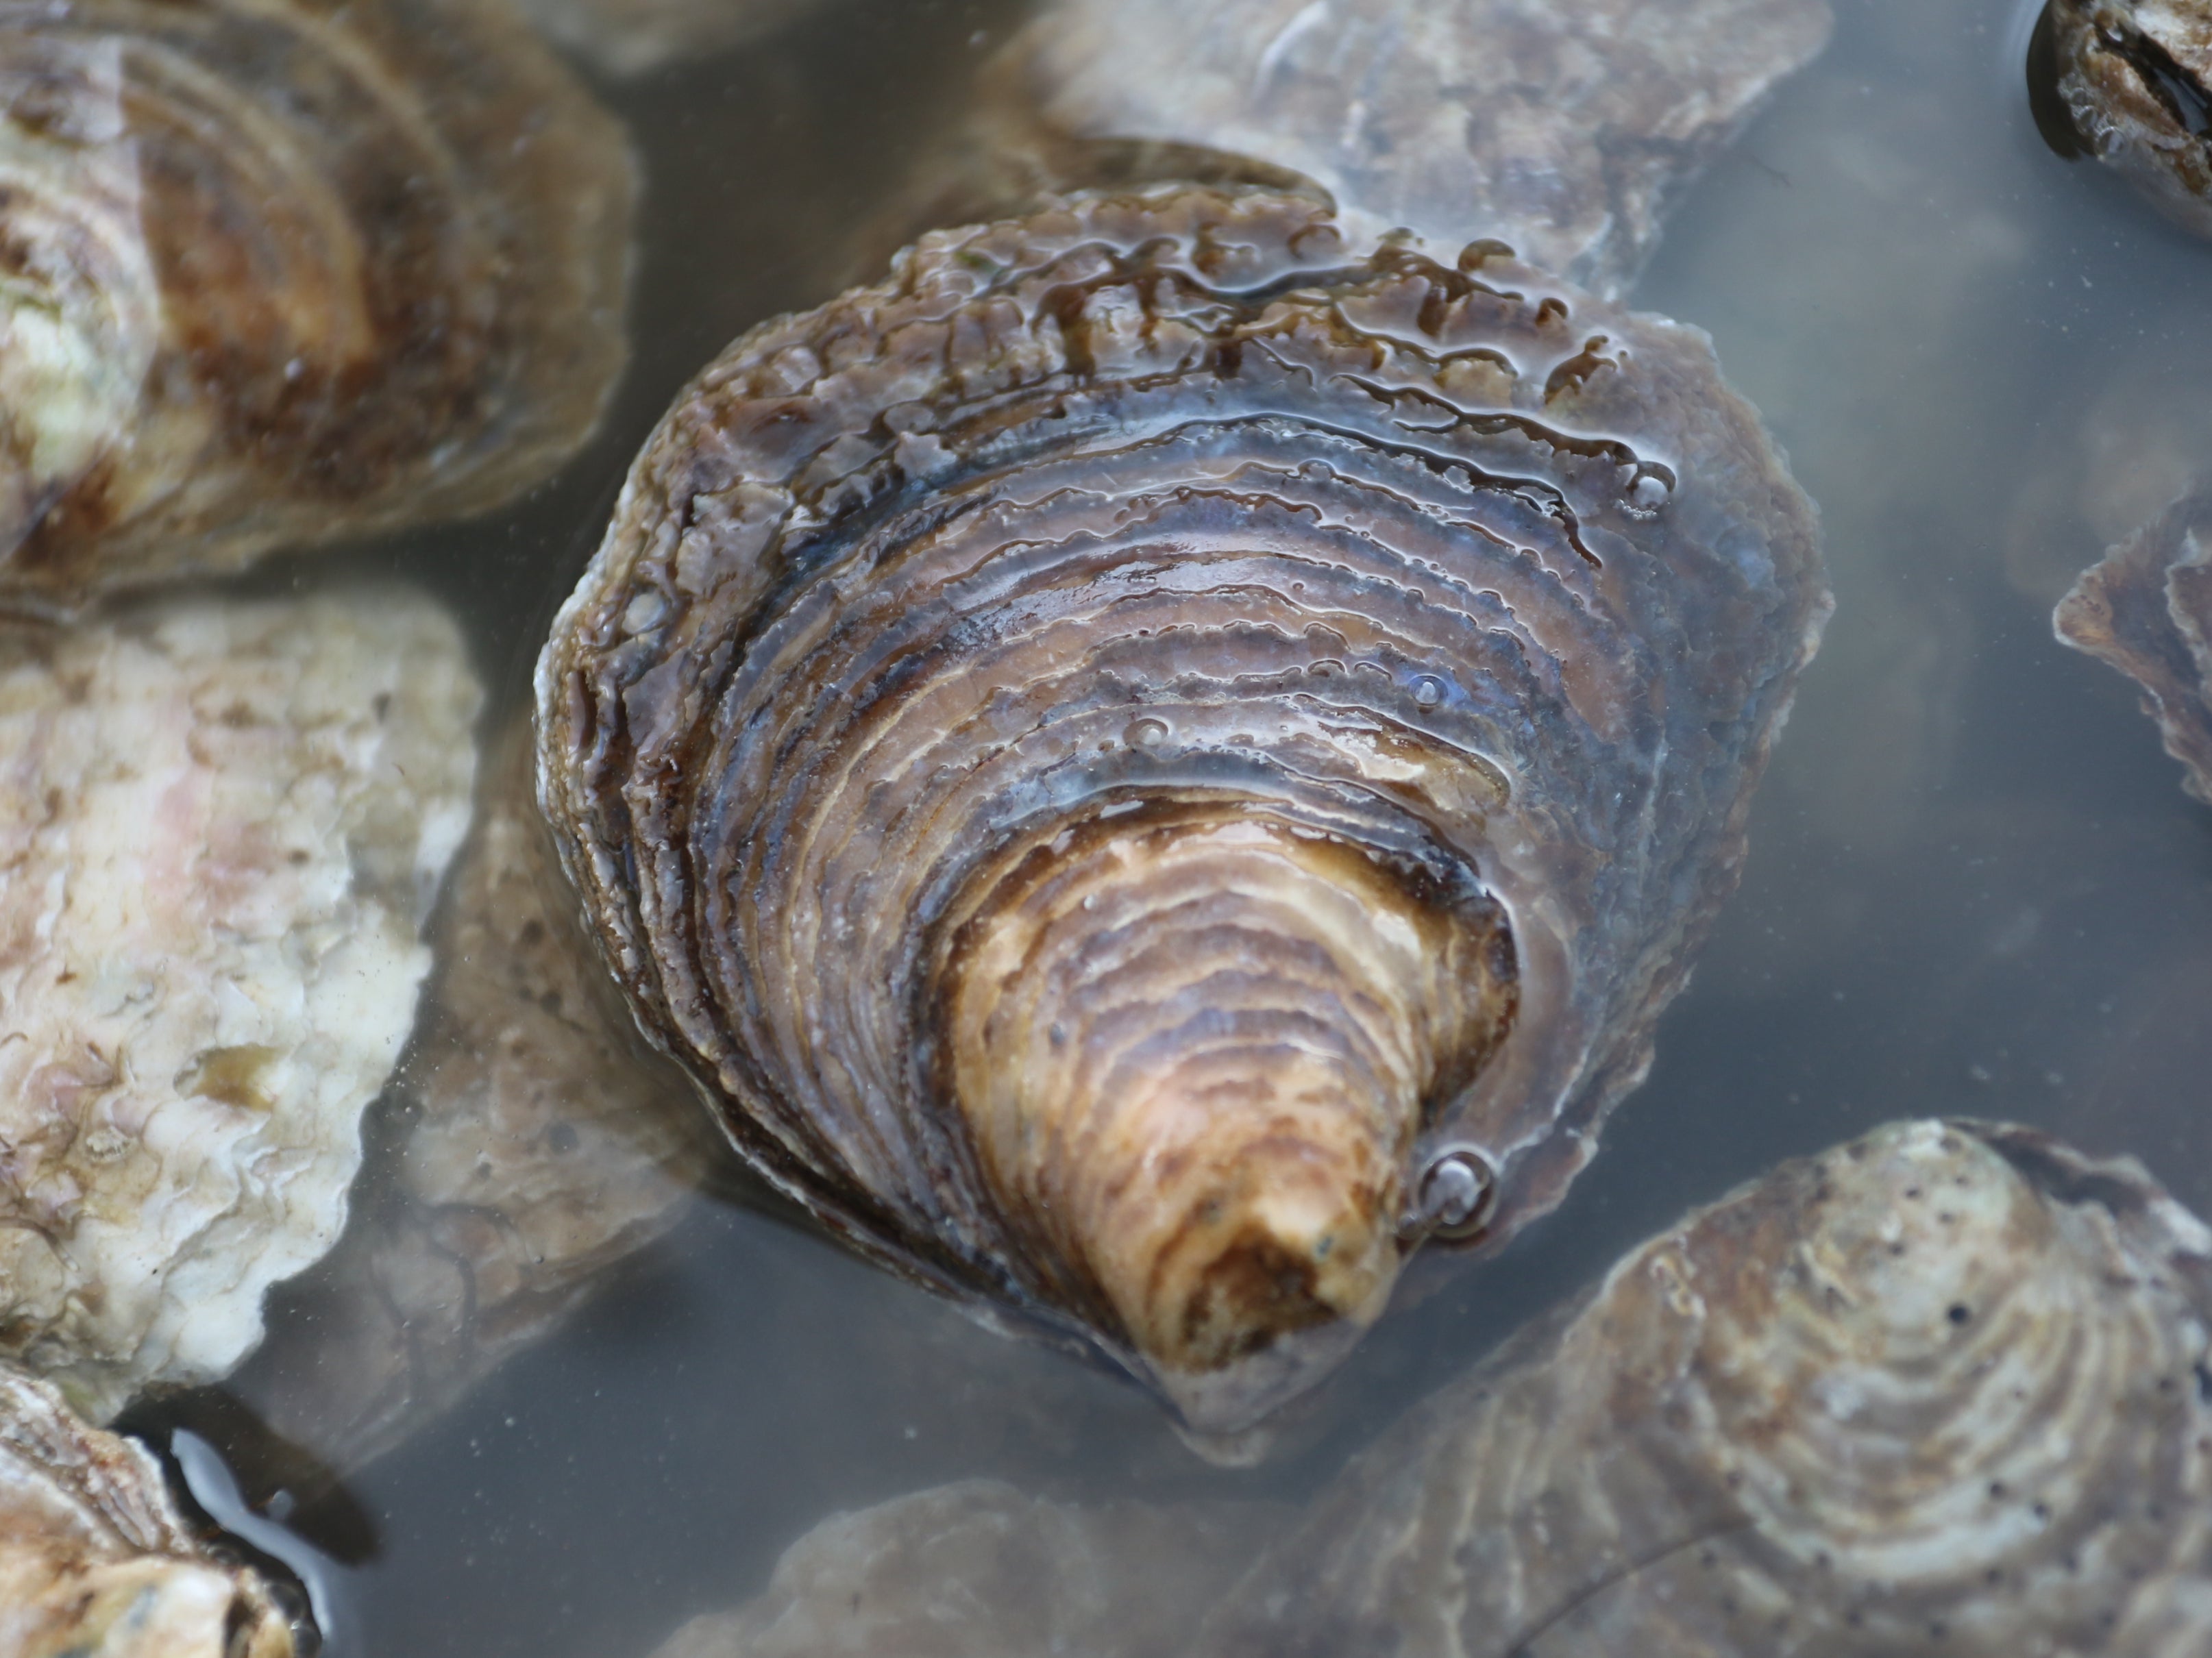 The UK’s native oyster species faces extinction after catastrophic declines